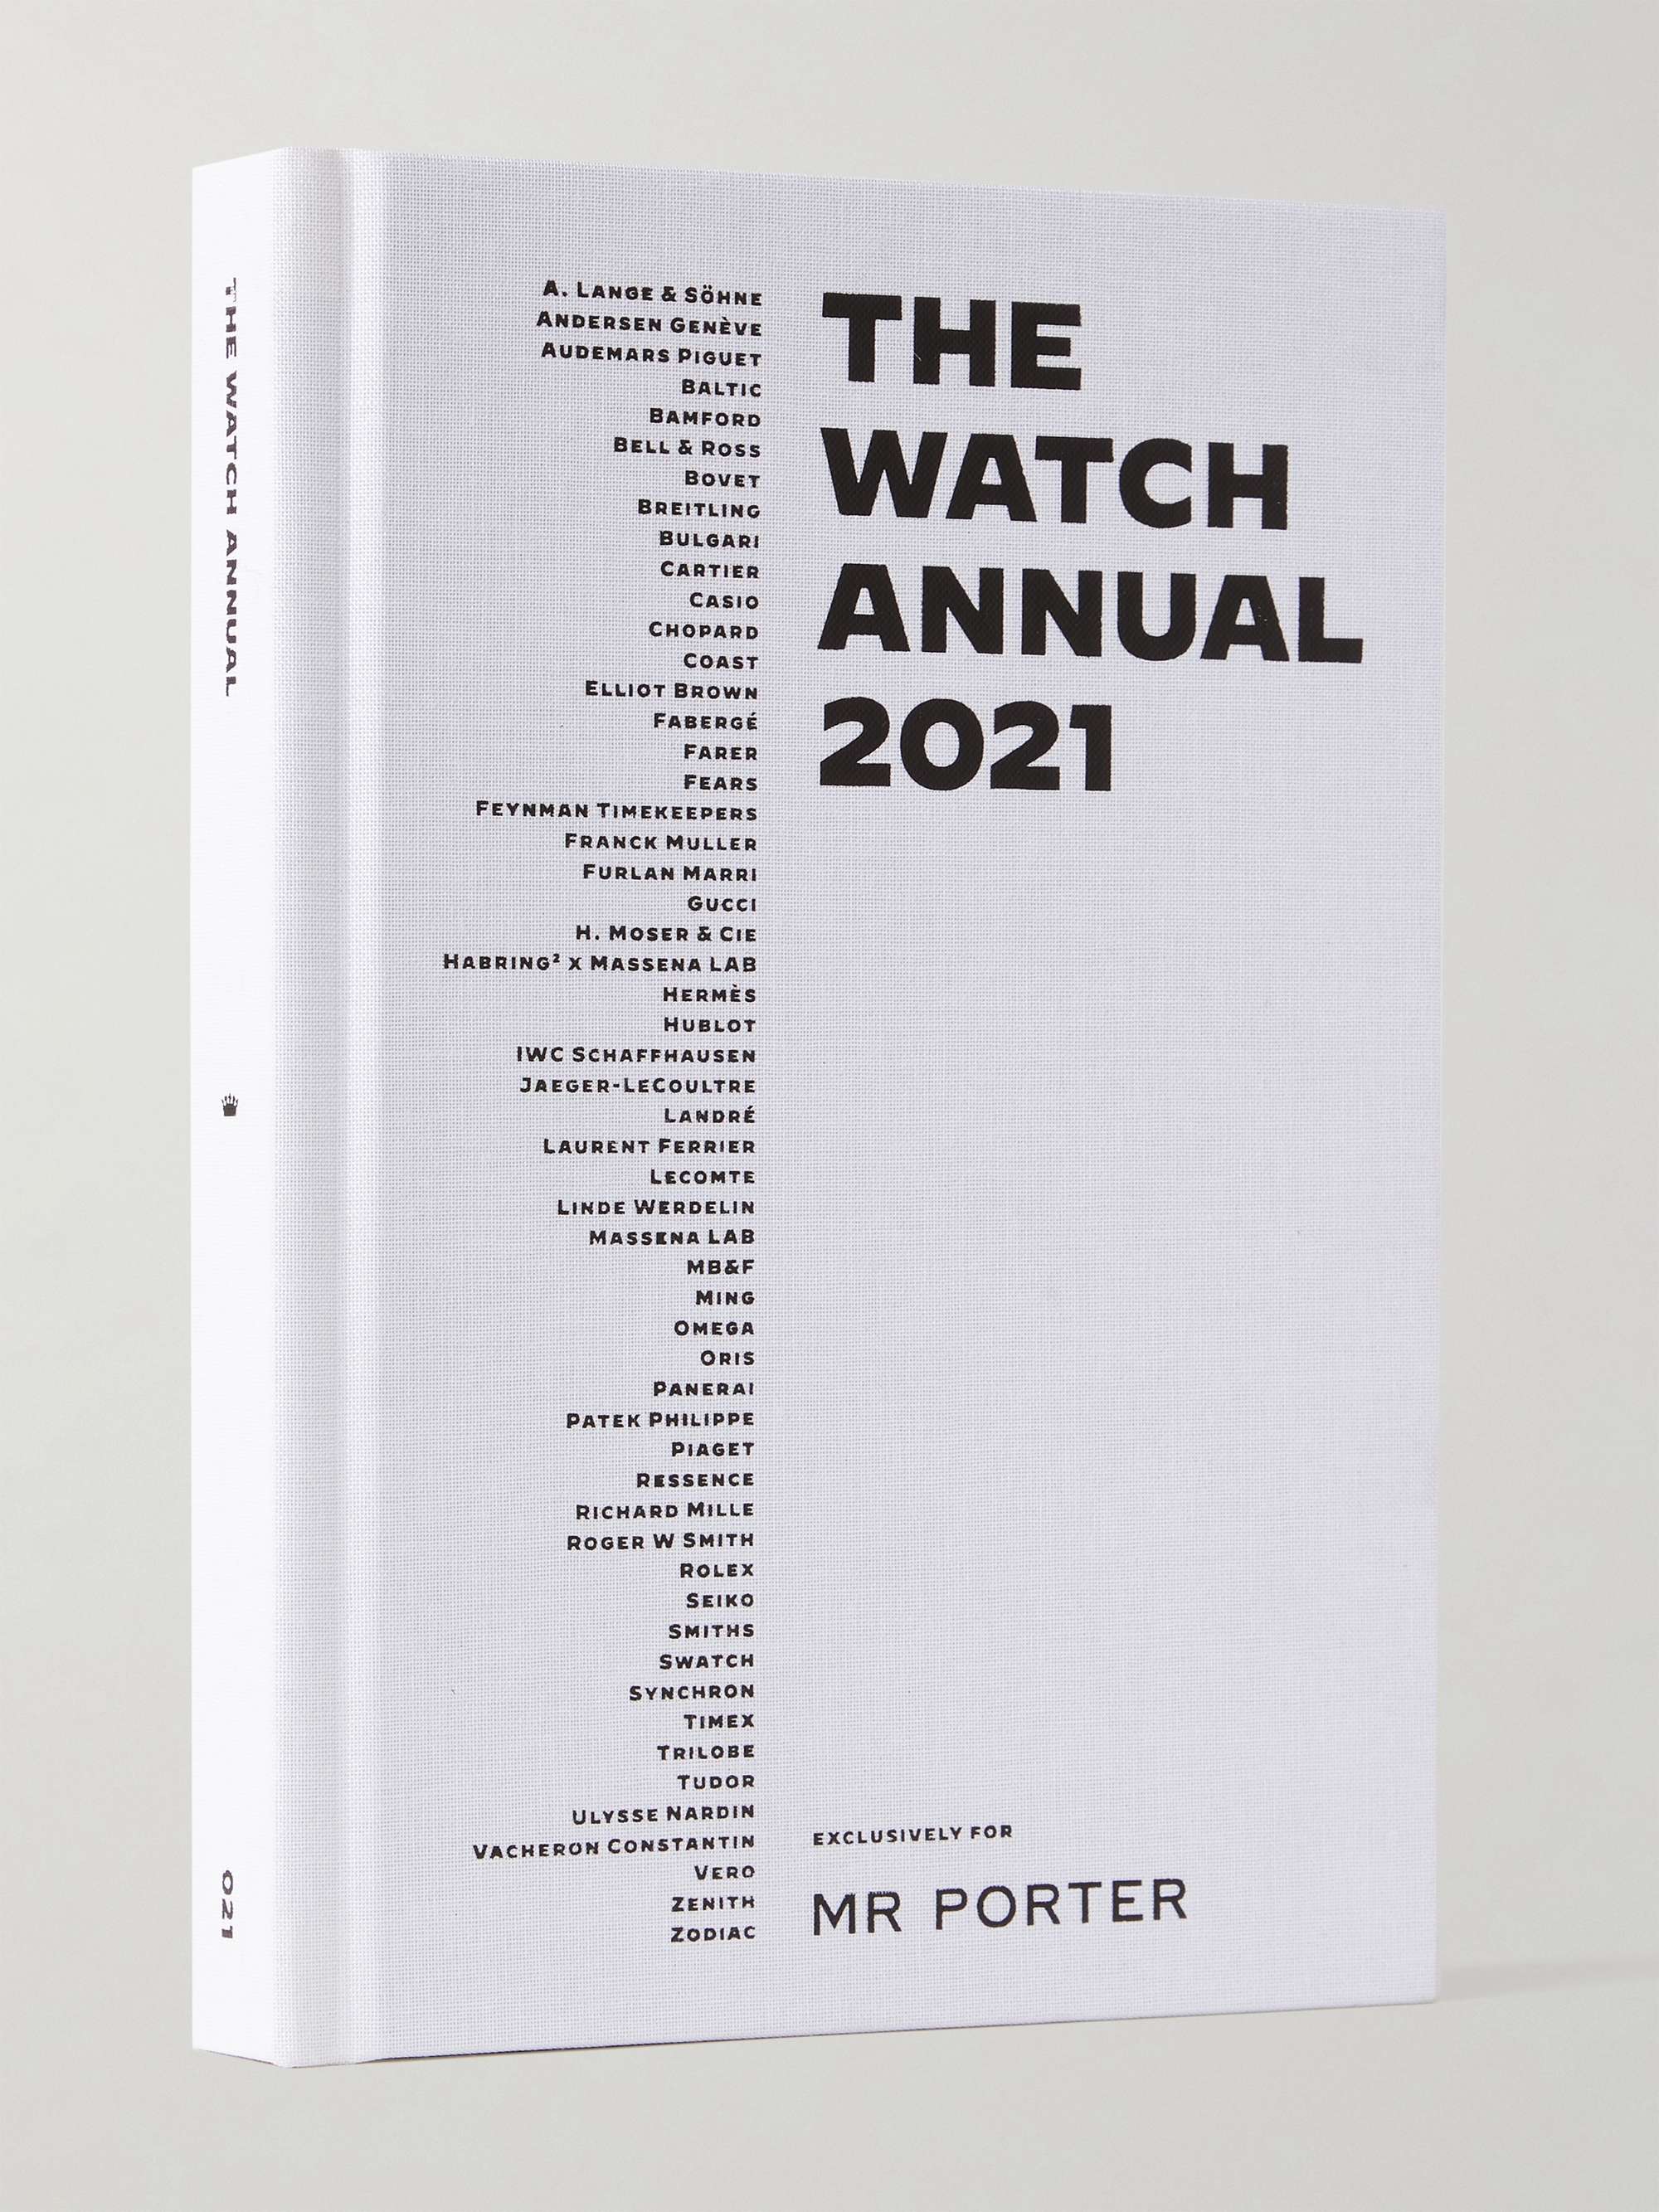 THE WATCH ANNUAL The Watch Annual 2021 Exclusive MR PORTER Edition Hardcover Book